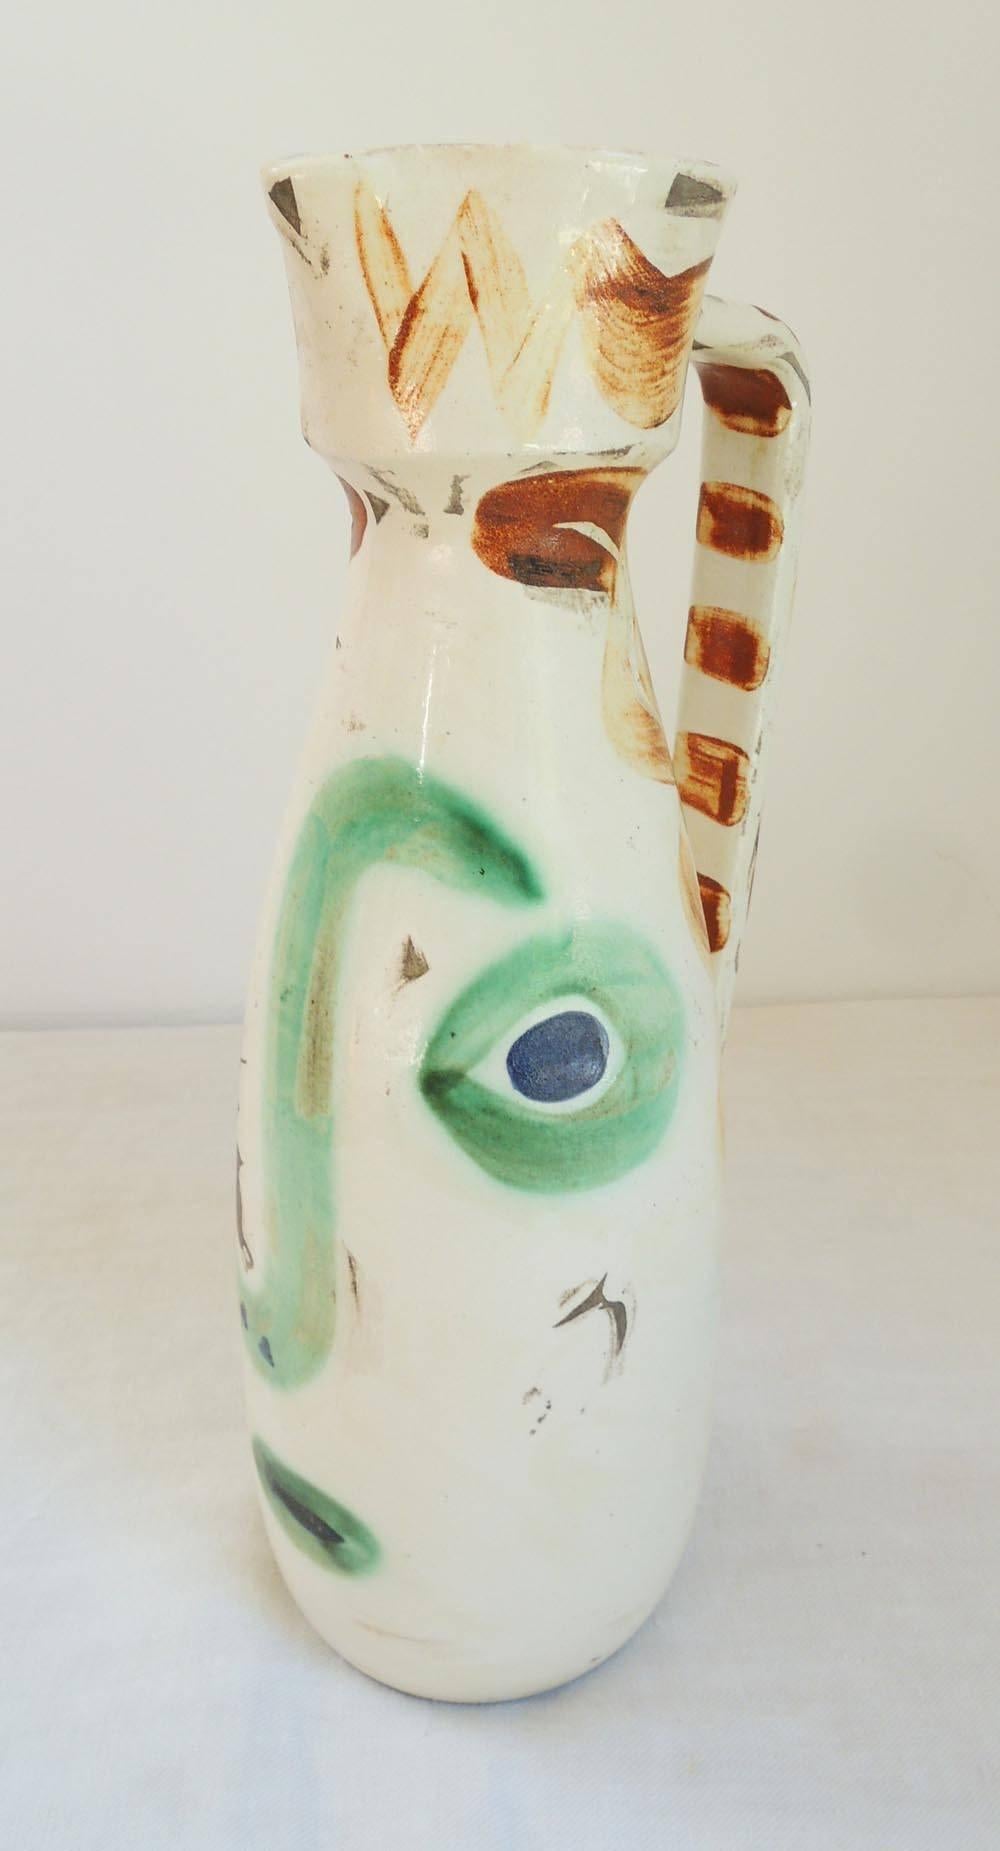 Part of the series Pablo Picasso did painting faces on common kitchen ceramic objects from 1947-1971. This pitcher is dated 9.1.69, incised below the handle.
This piece is number 380 of a series of 500. The imperfections in the glaze are